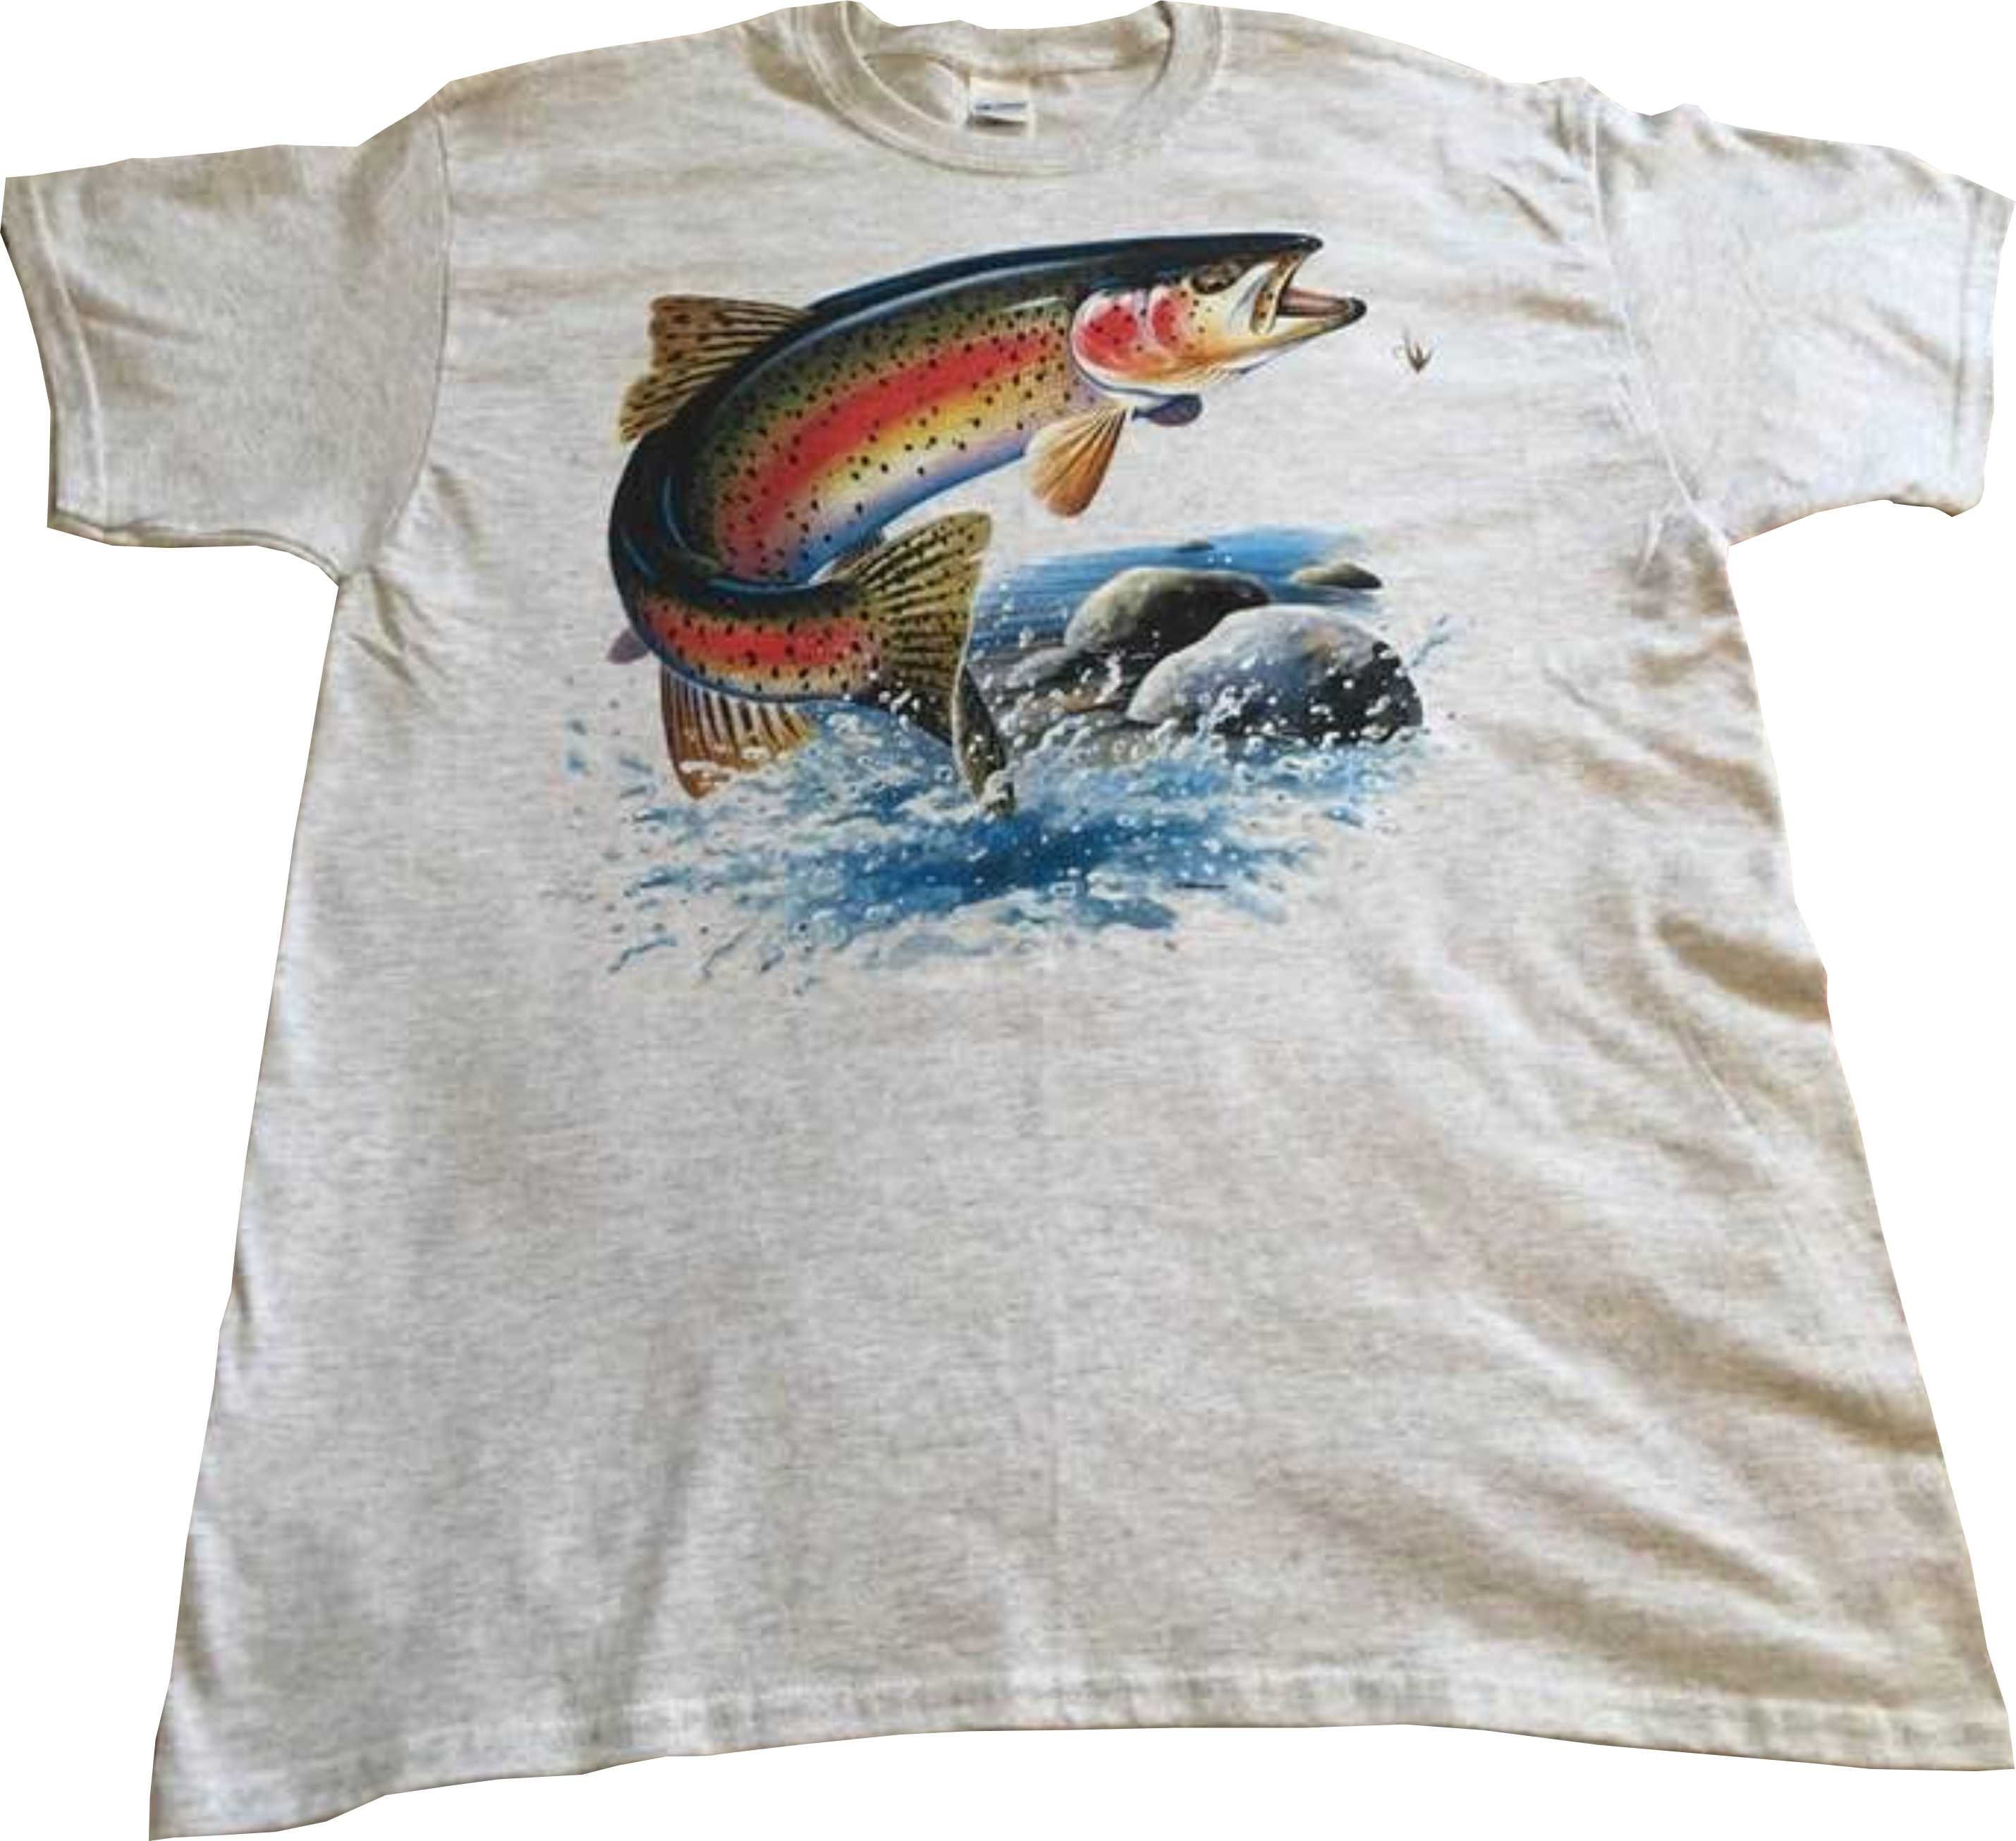 Rainbow Trout T Shirt, Jumping Trout Fish, Fishing Shirt, (Sweatshirt, Hoodie Available On request) 249E